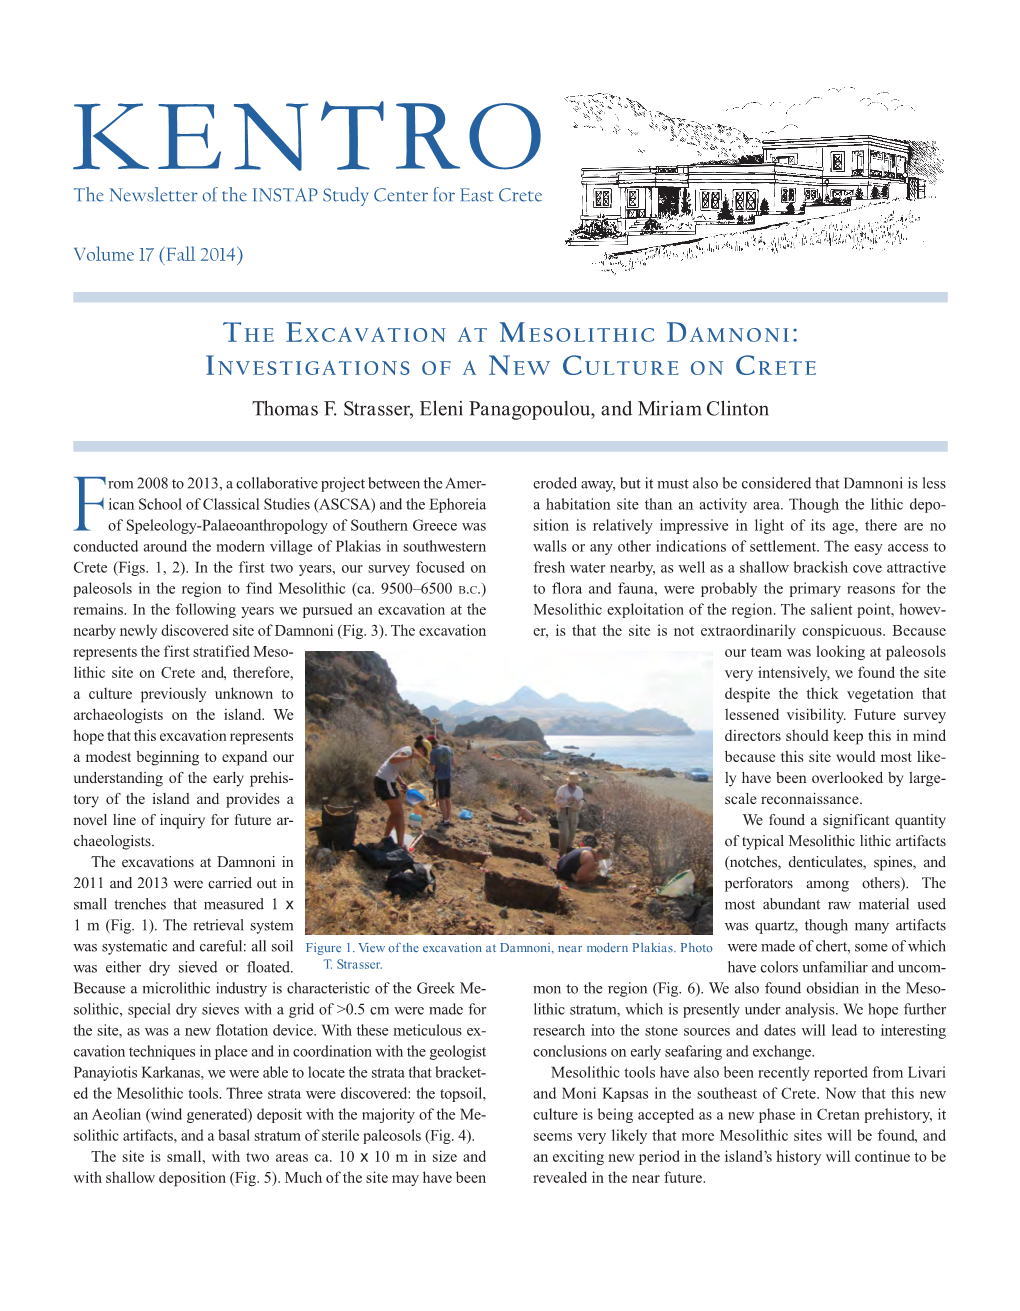 KENTRO the Newsletter of the INSTAP Study Center for East Crete